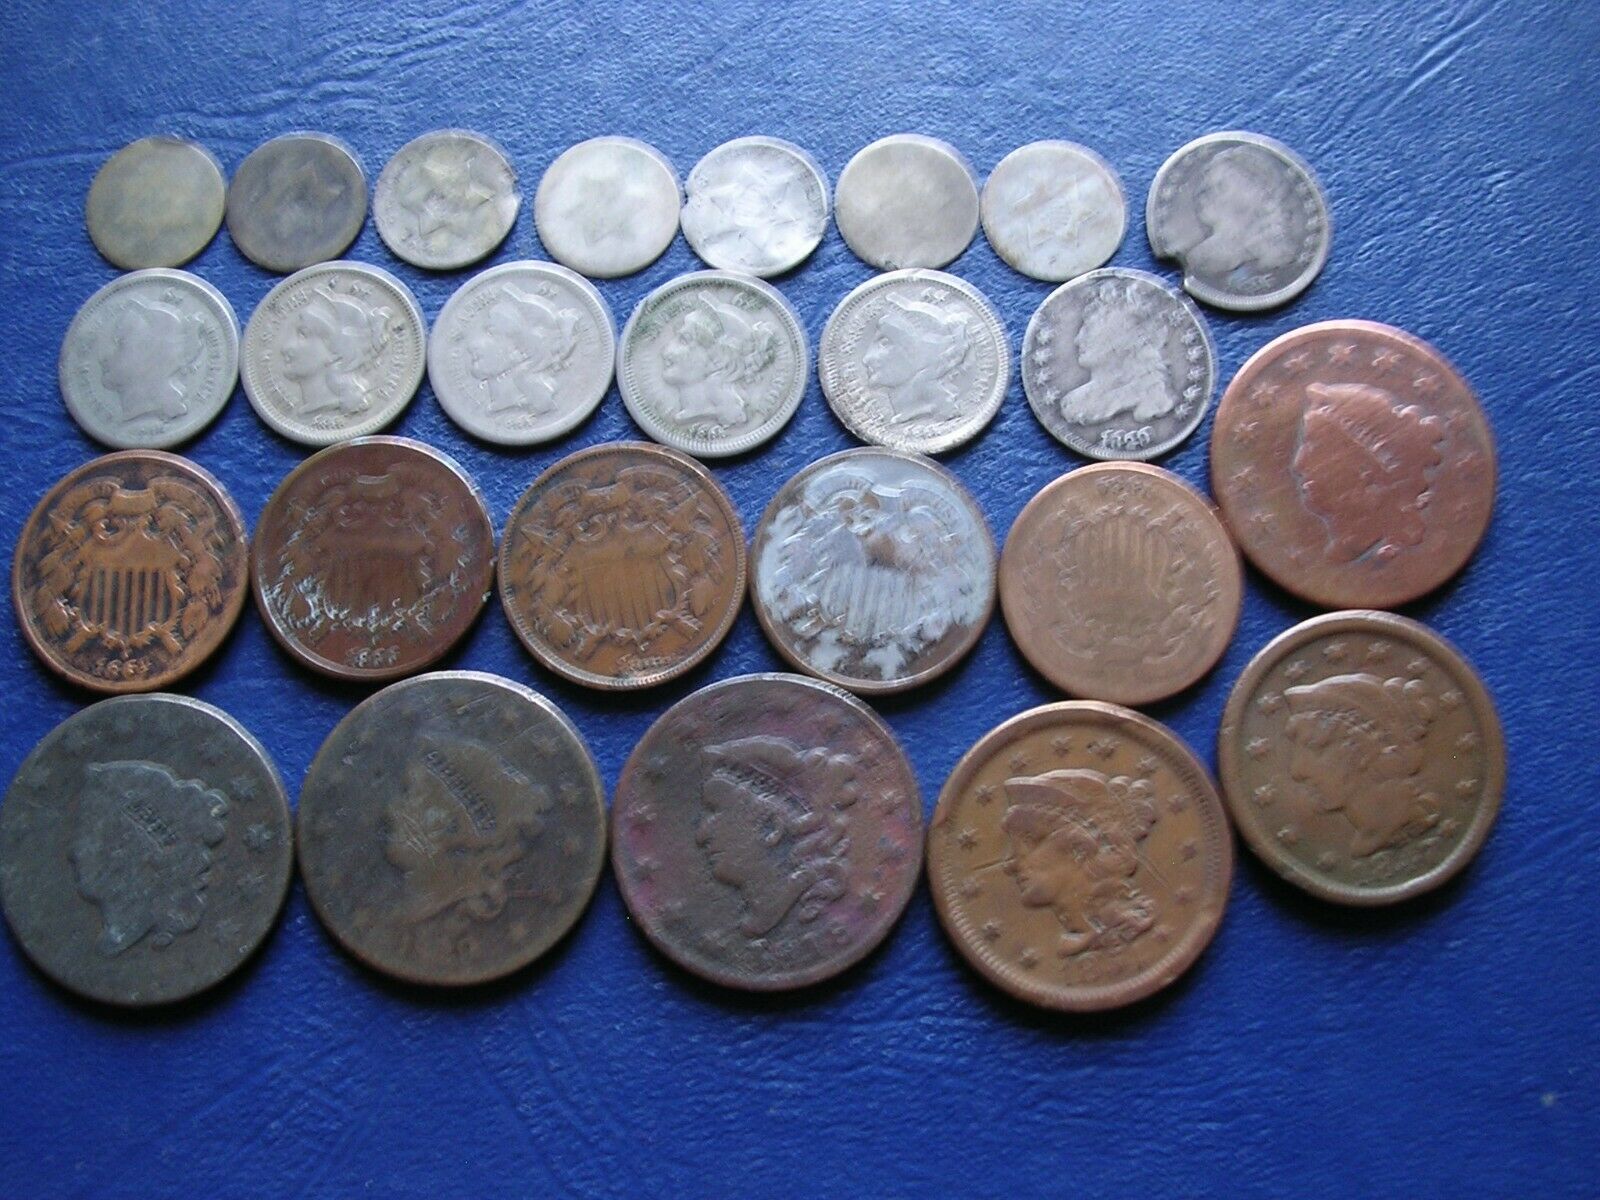 6 Large Cents, 5 2cent, 7 3cent Silver, 5 3cent Nickel & 2 Bust Dimes W/problems